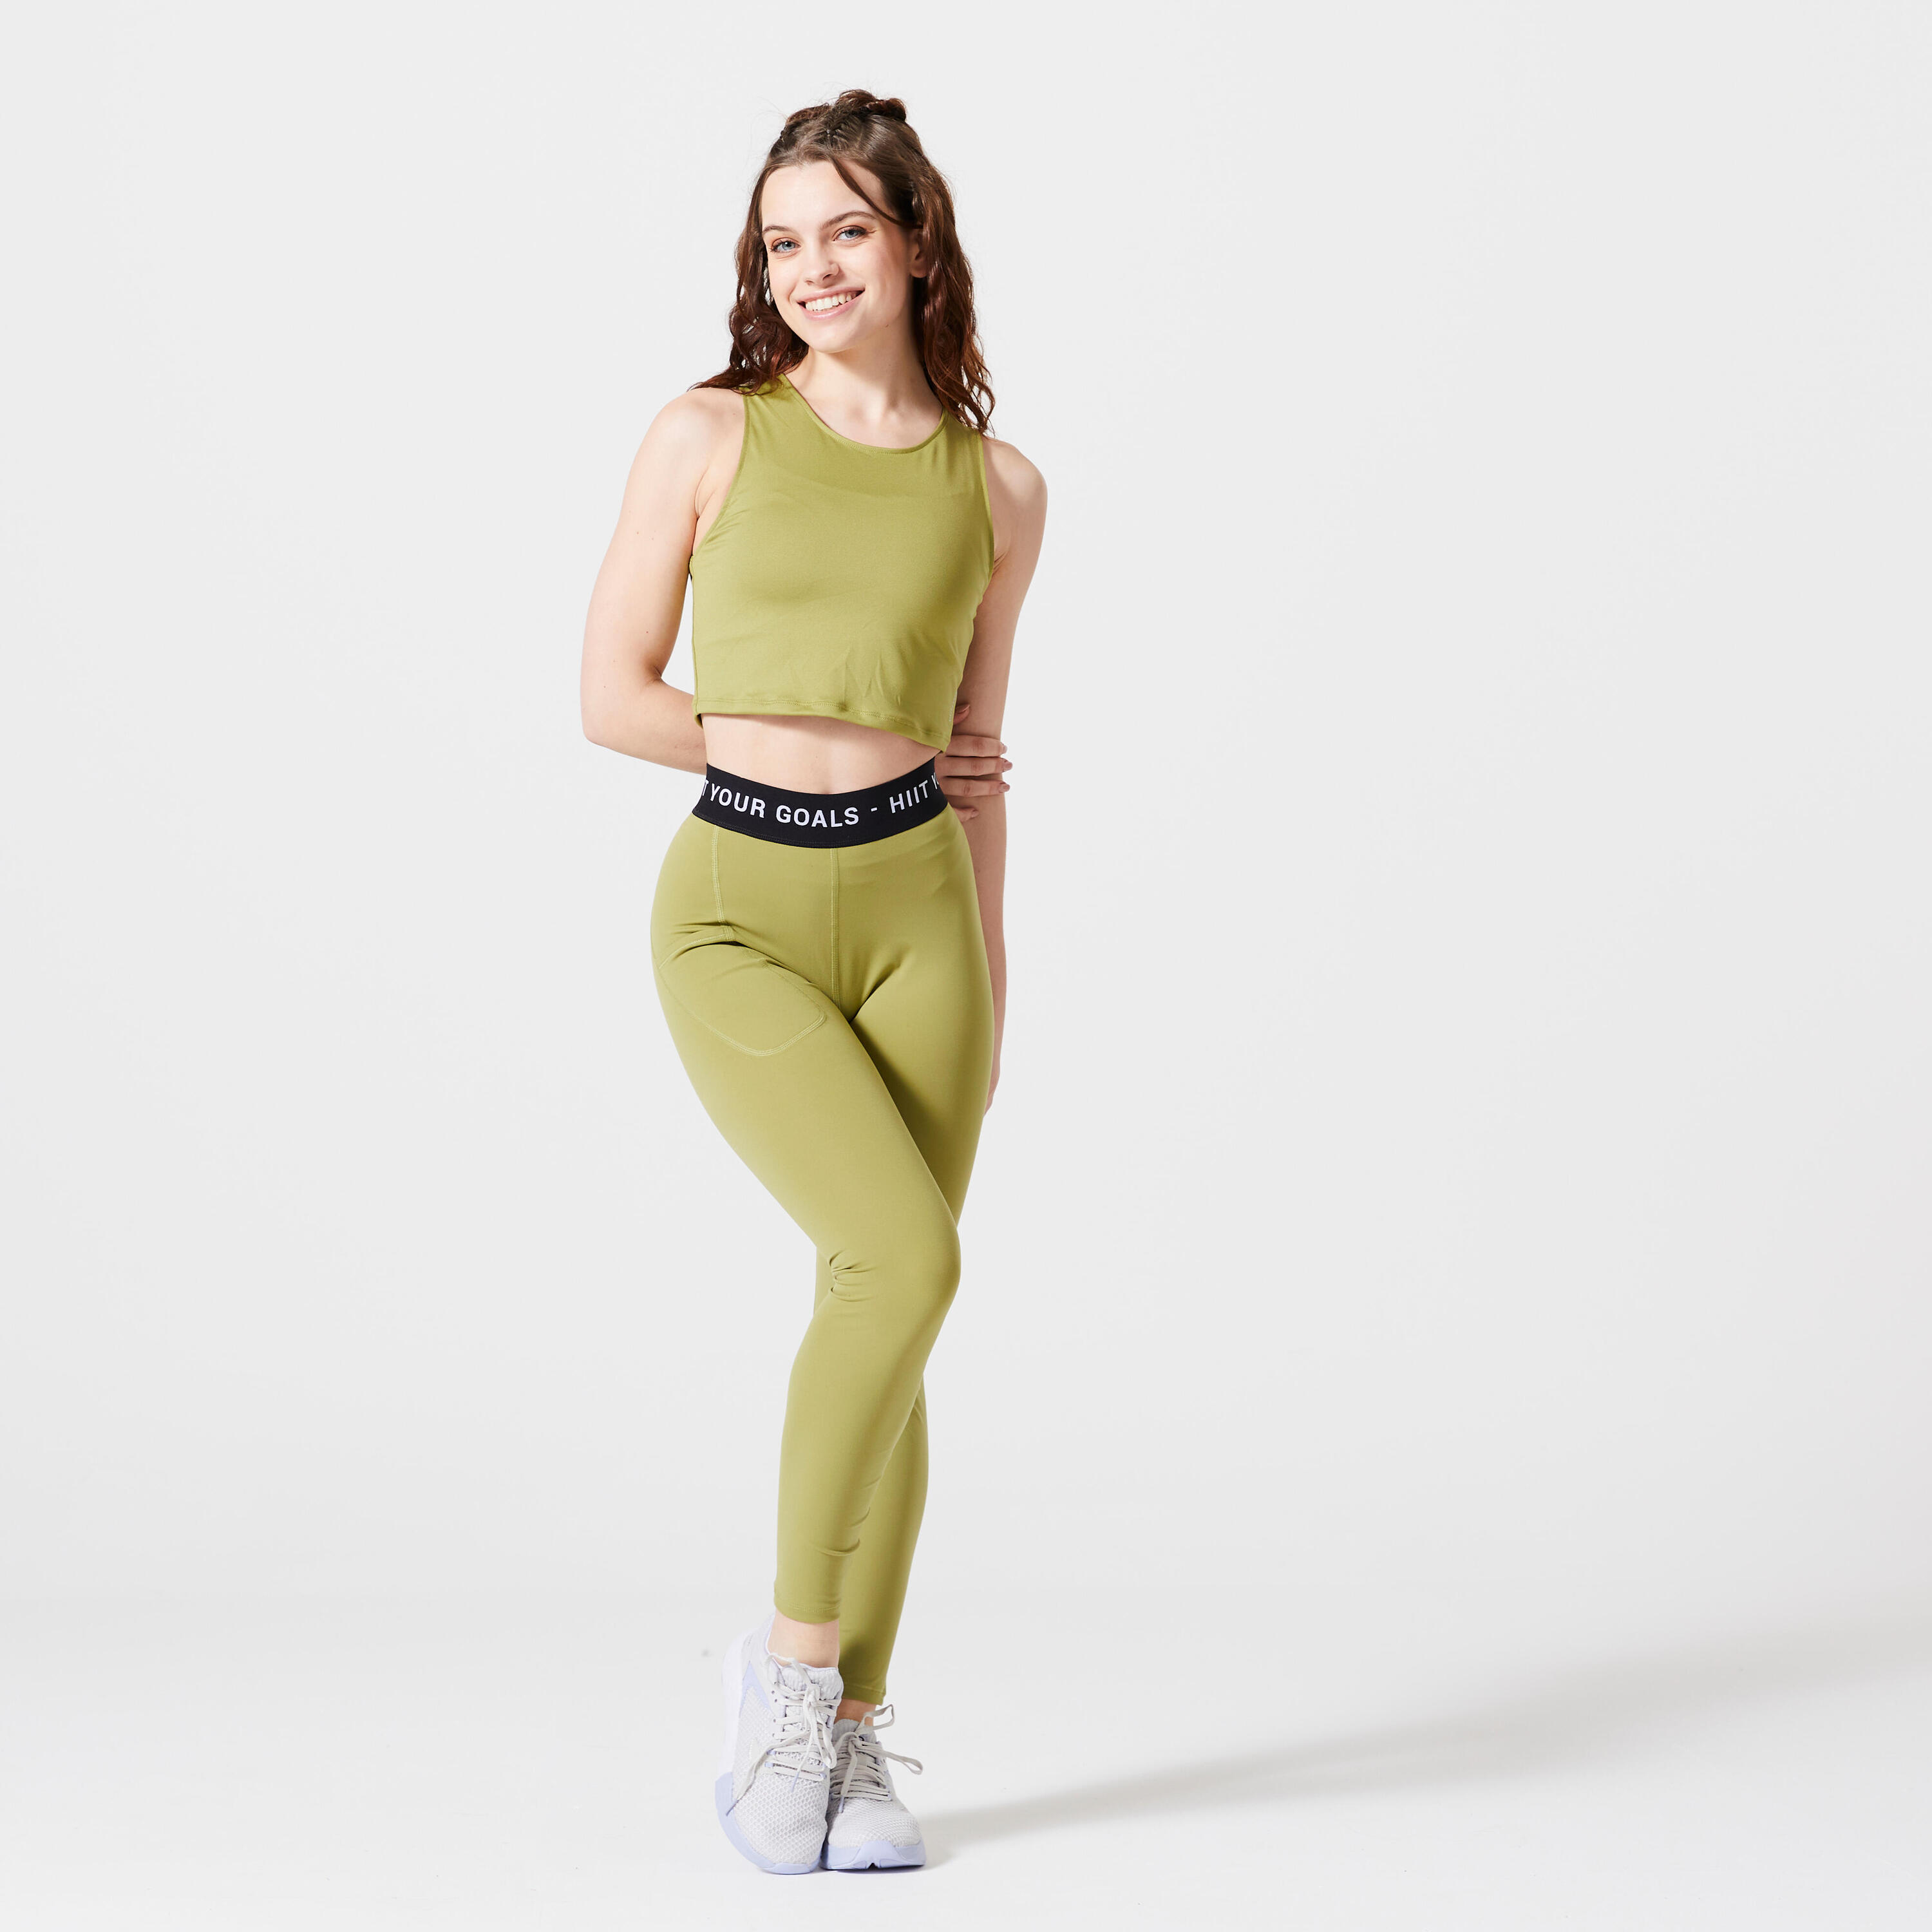 Women's Cardio Fitness Cropped Tank Top - Olive Green 2/8